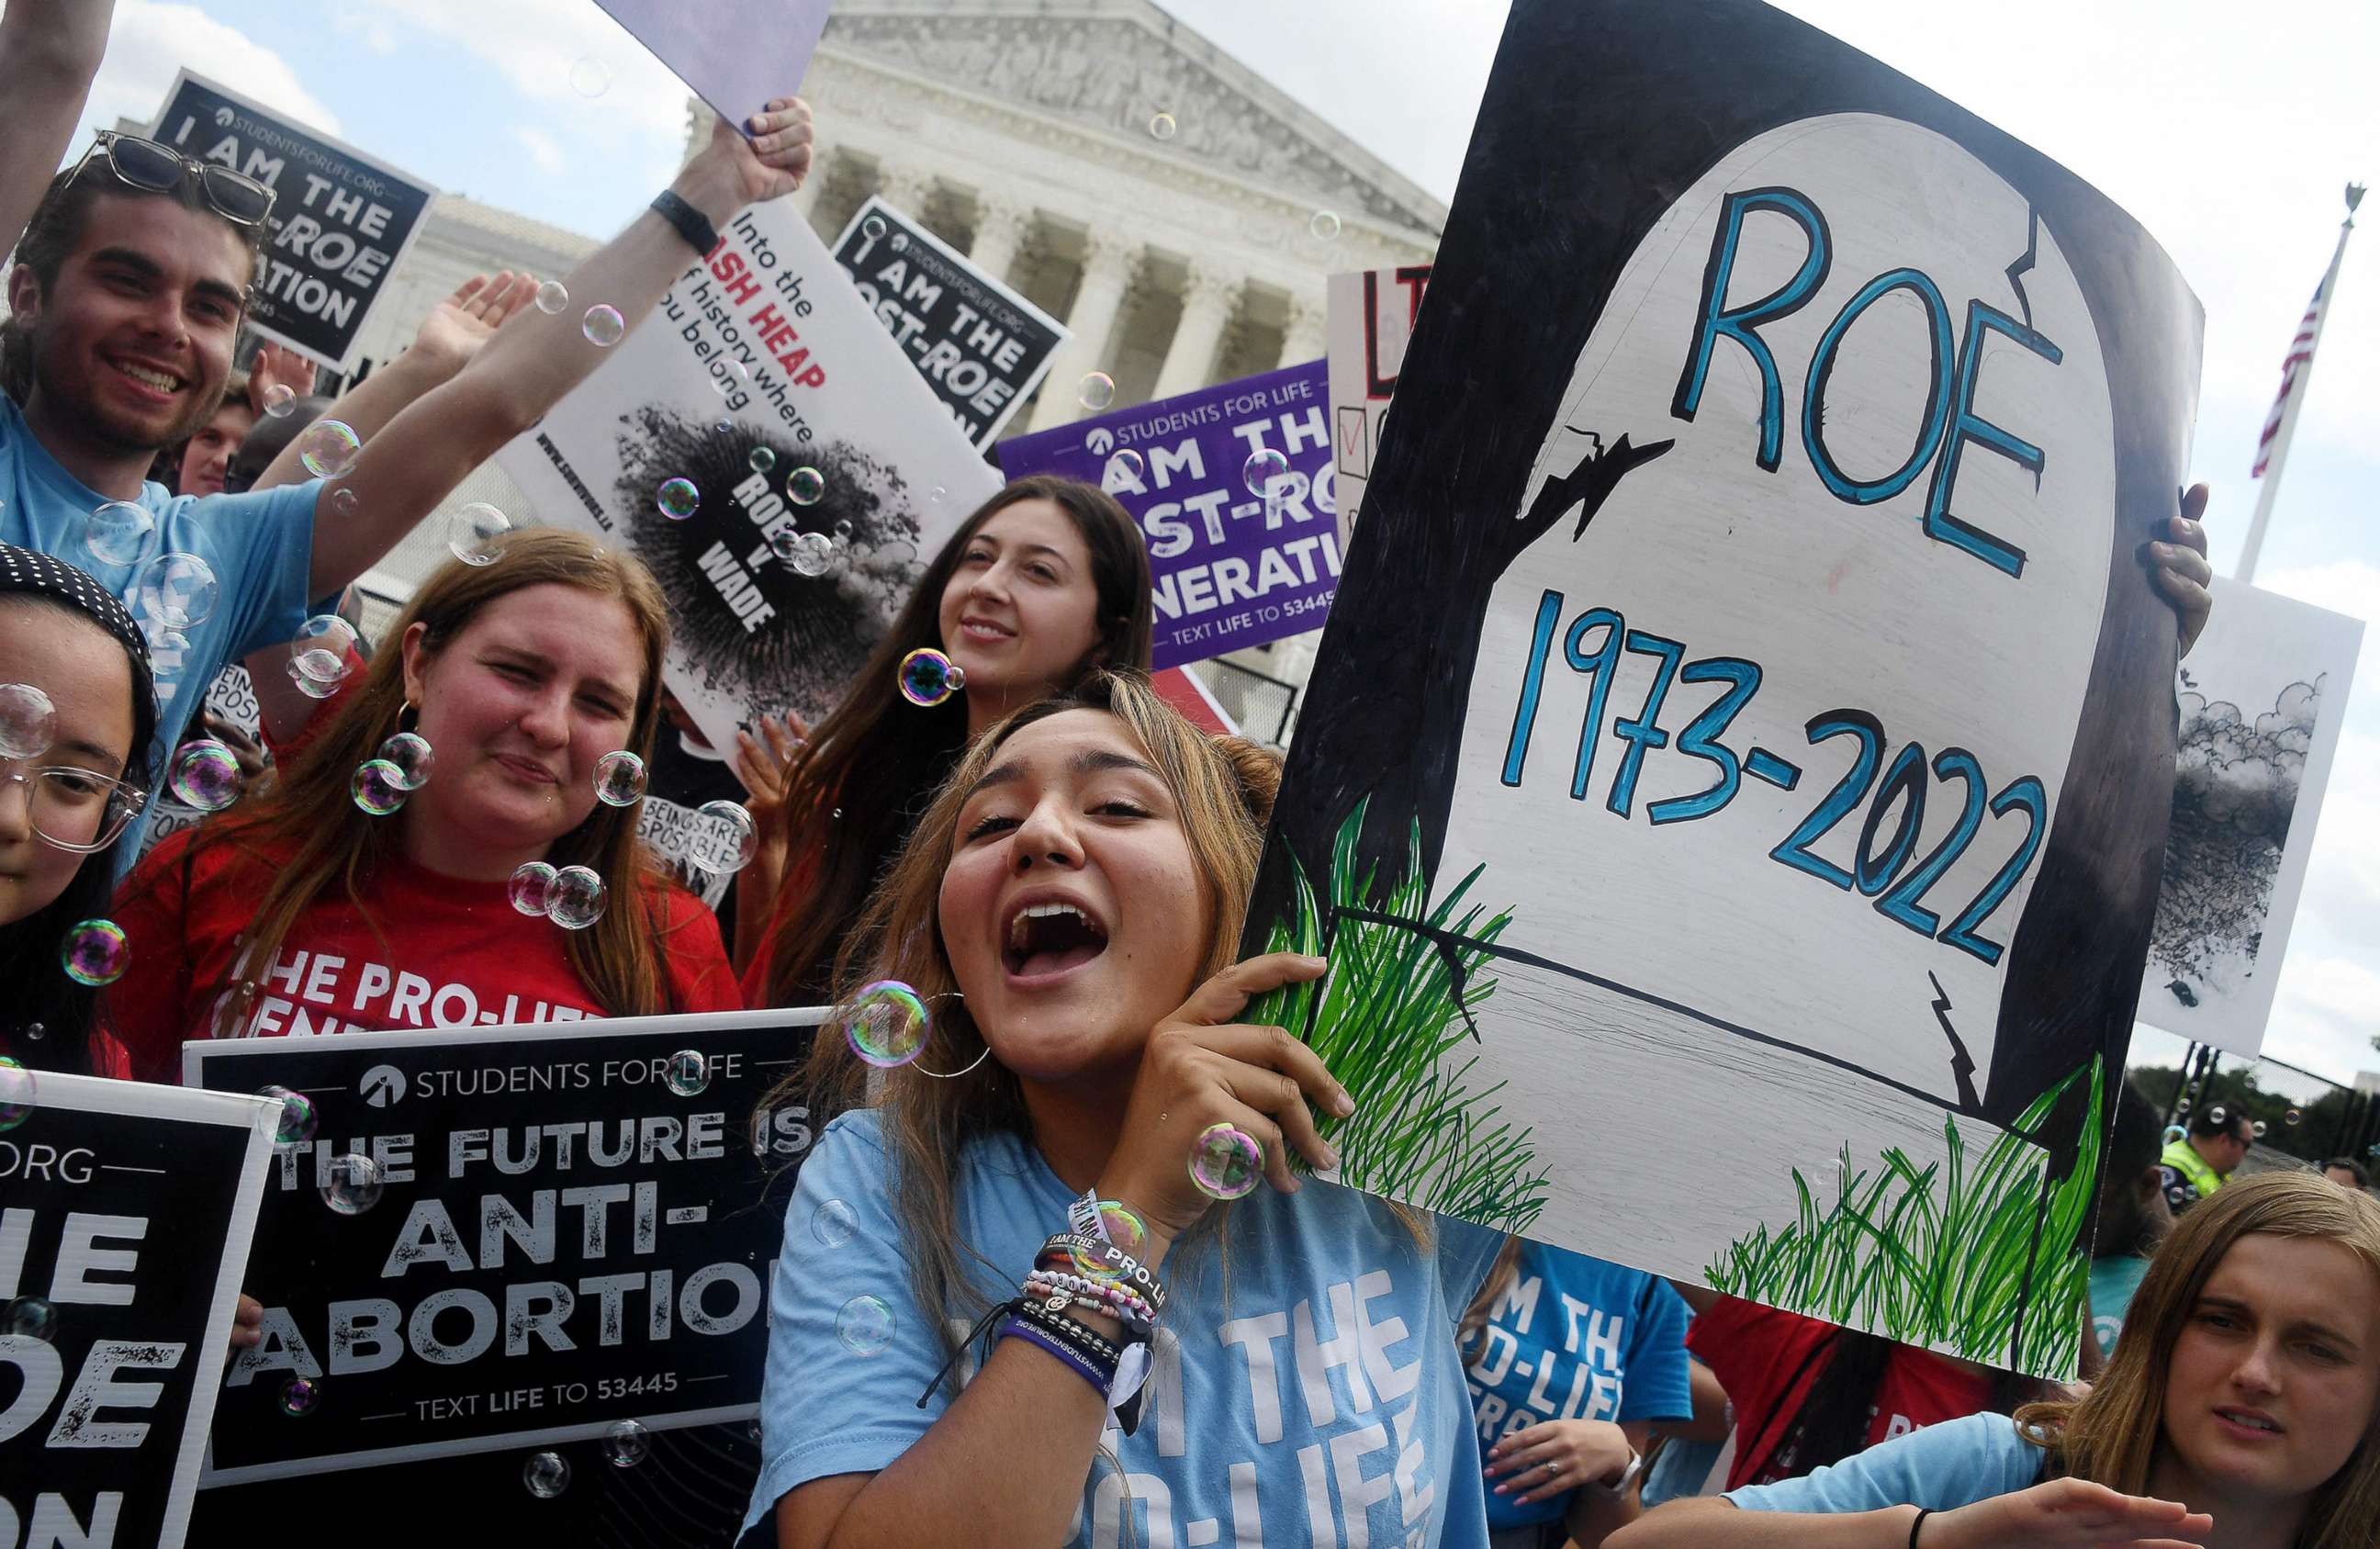 PHOTO: In this June 24, 2022, file photo, anti-abortion campaigners celebrate outside the Supreme Court.